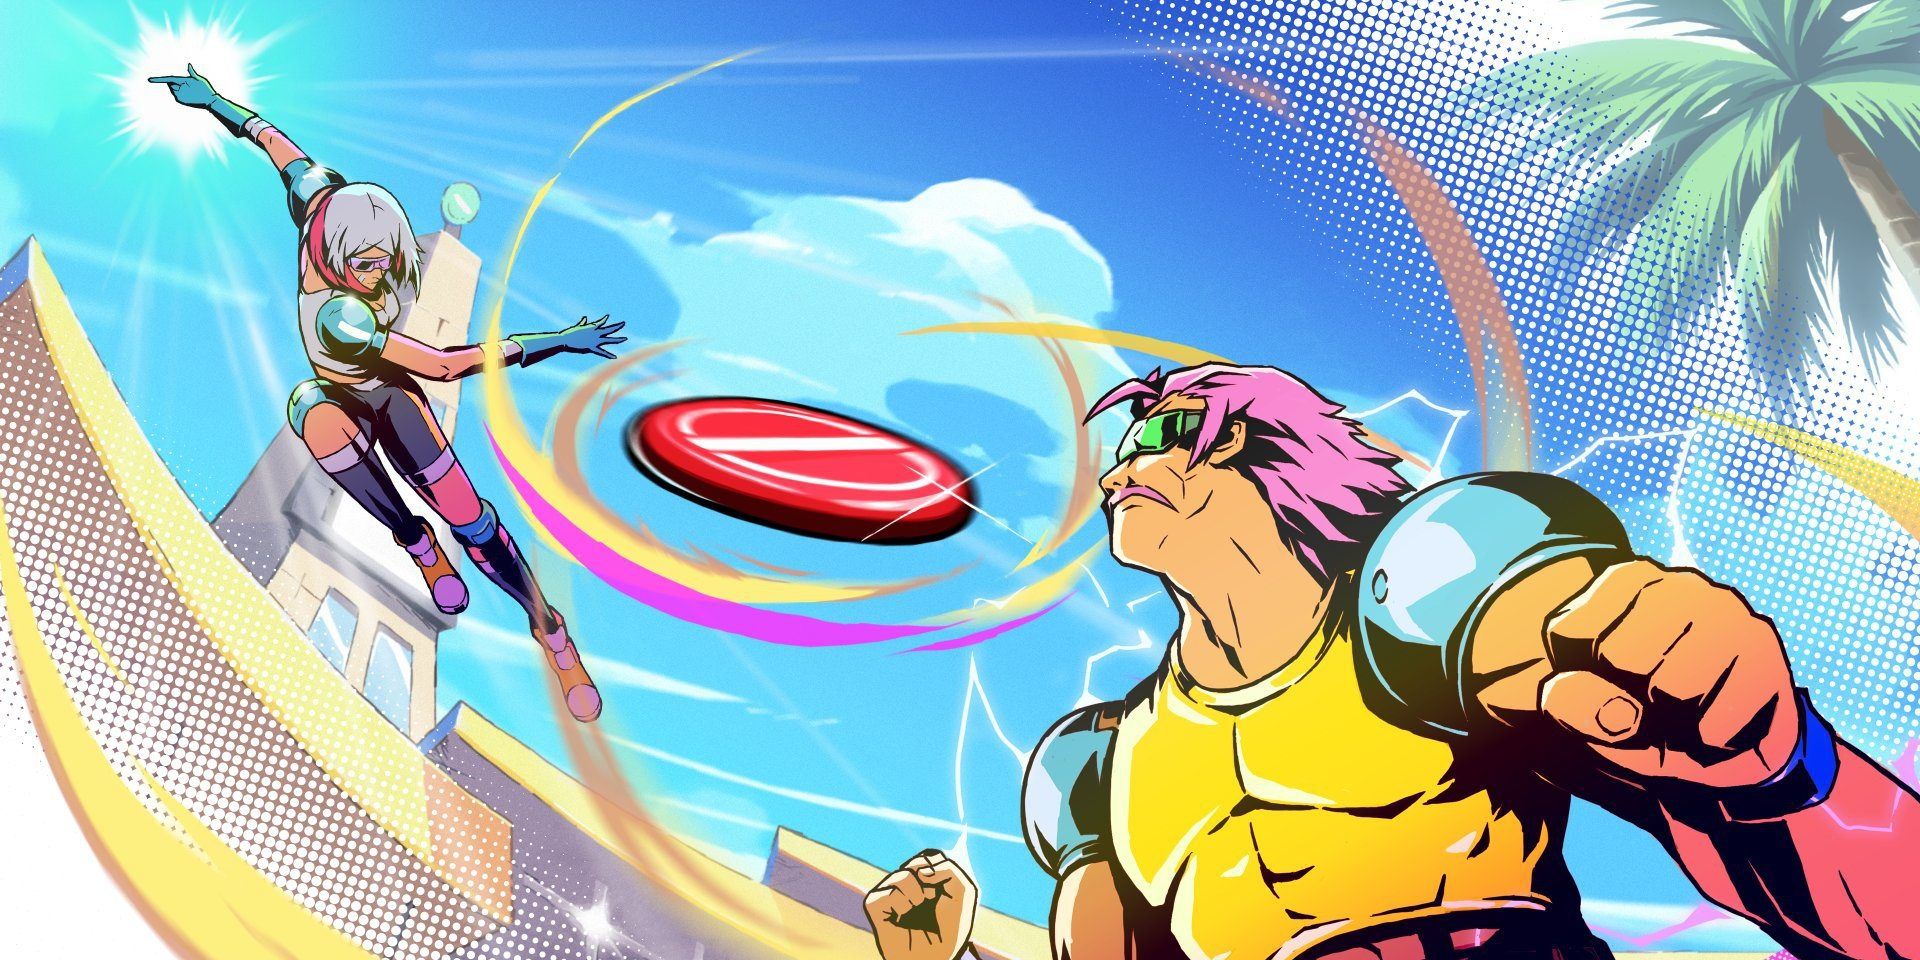 A photo depicting a player smashing the disc from midair in Windjammers 2